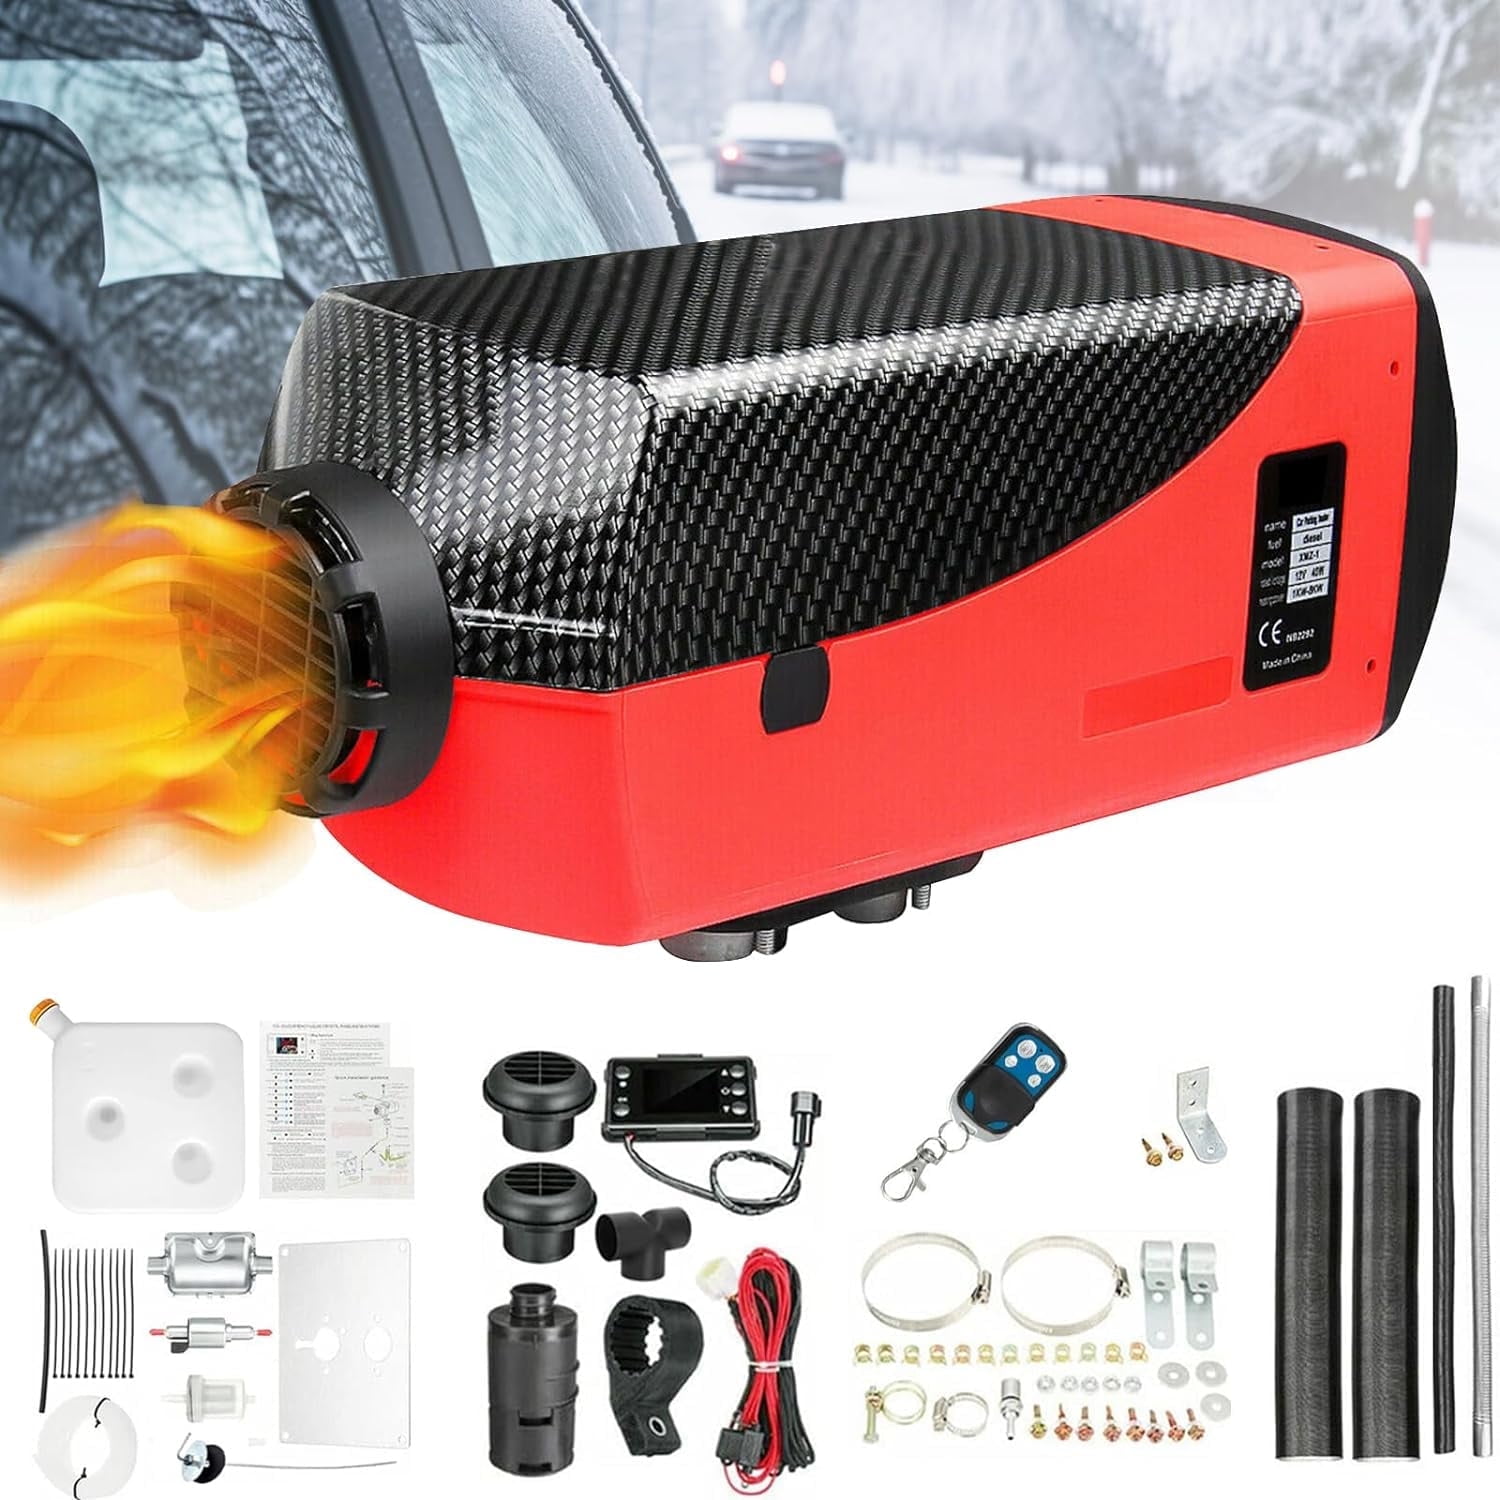 VEVOR Diesel Air Heater All In one, One Air Outlet, 8KW Diesel Heater 12V,  Fast Heating, Diesel Parking Heater with Red LCD Switch, Remote Control For  Car, RV Truck, Boat, Campervans and